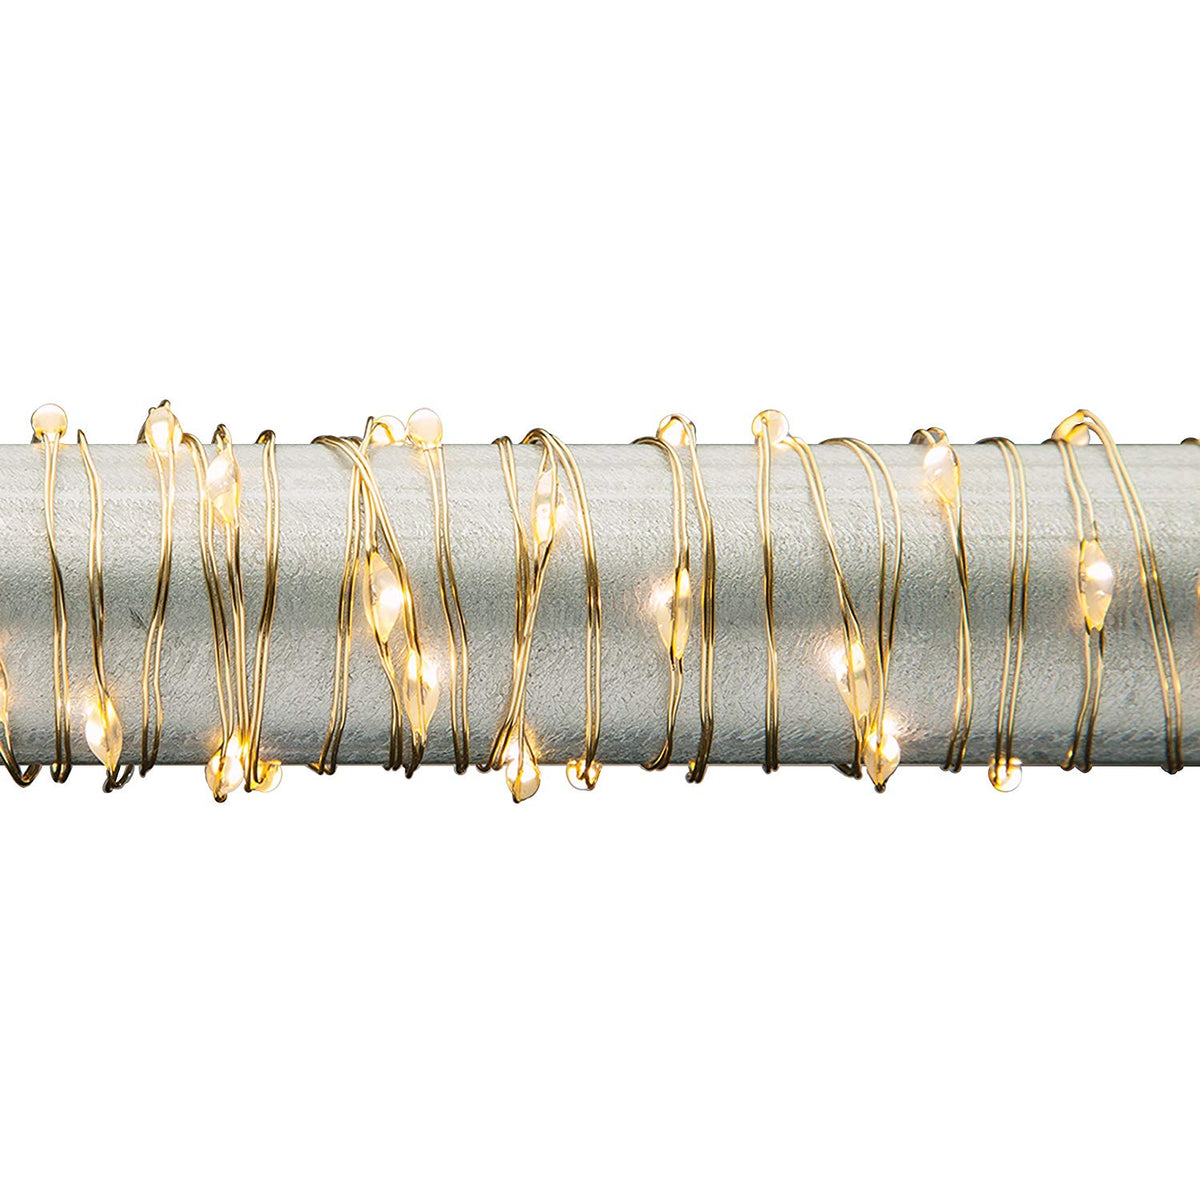 Everlasting Glow 93766 B/O Warm White Micro 30-LED String Light 5', Golden Wire